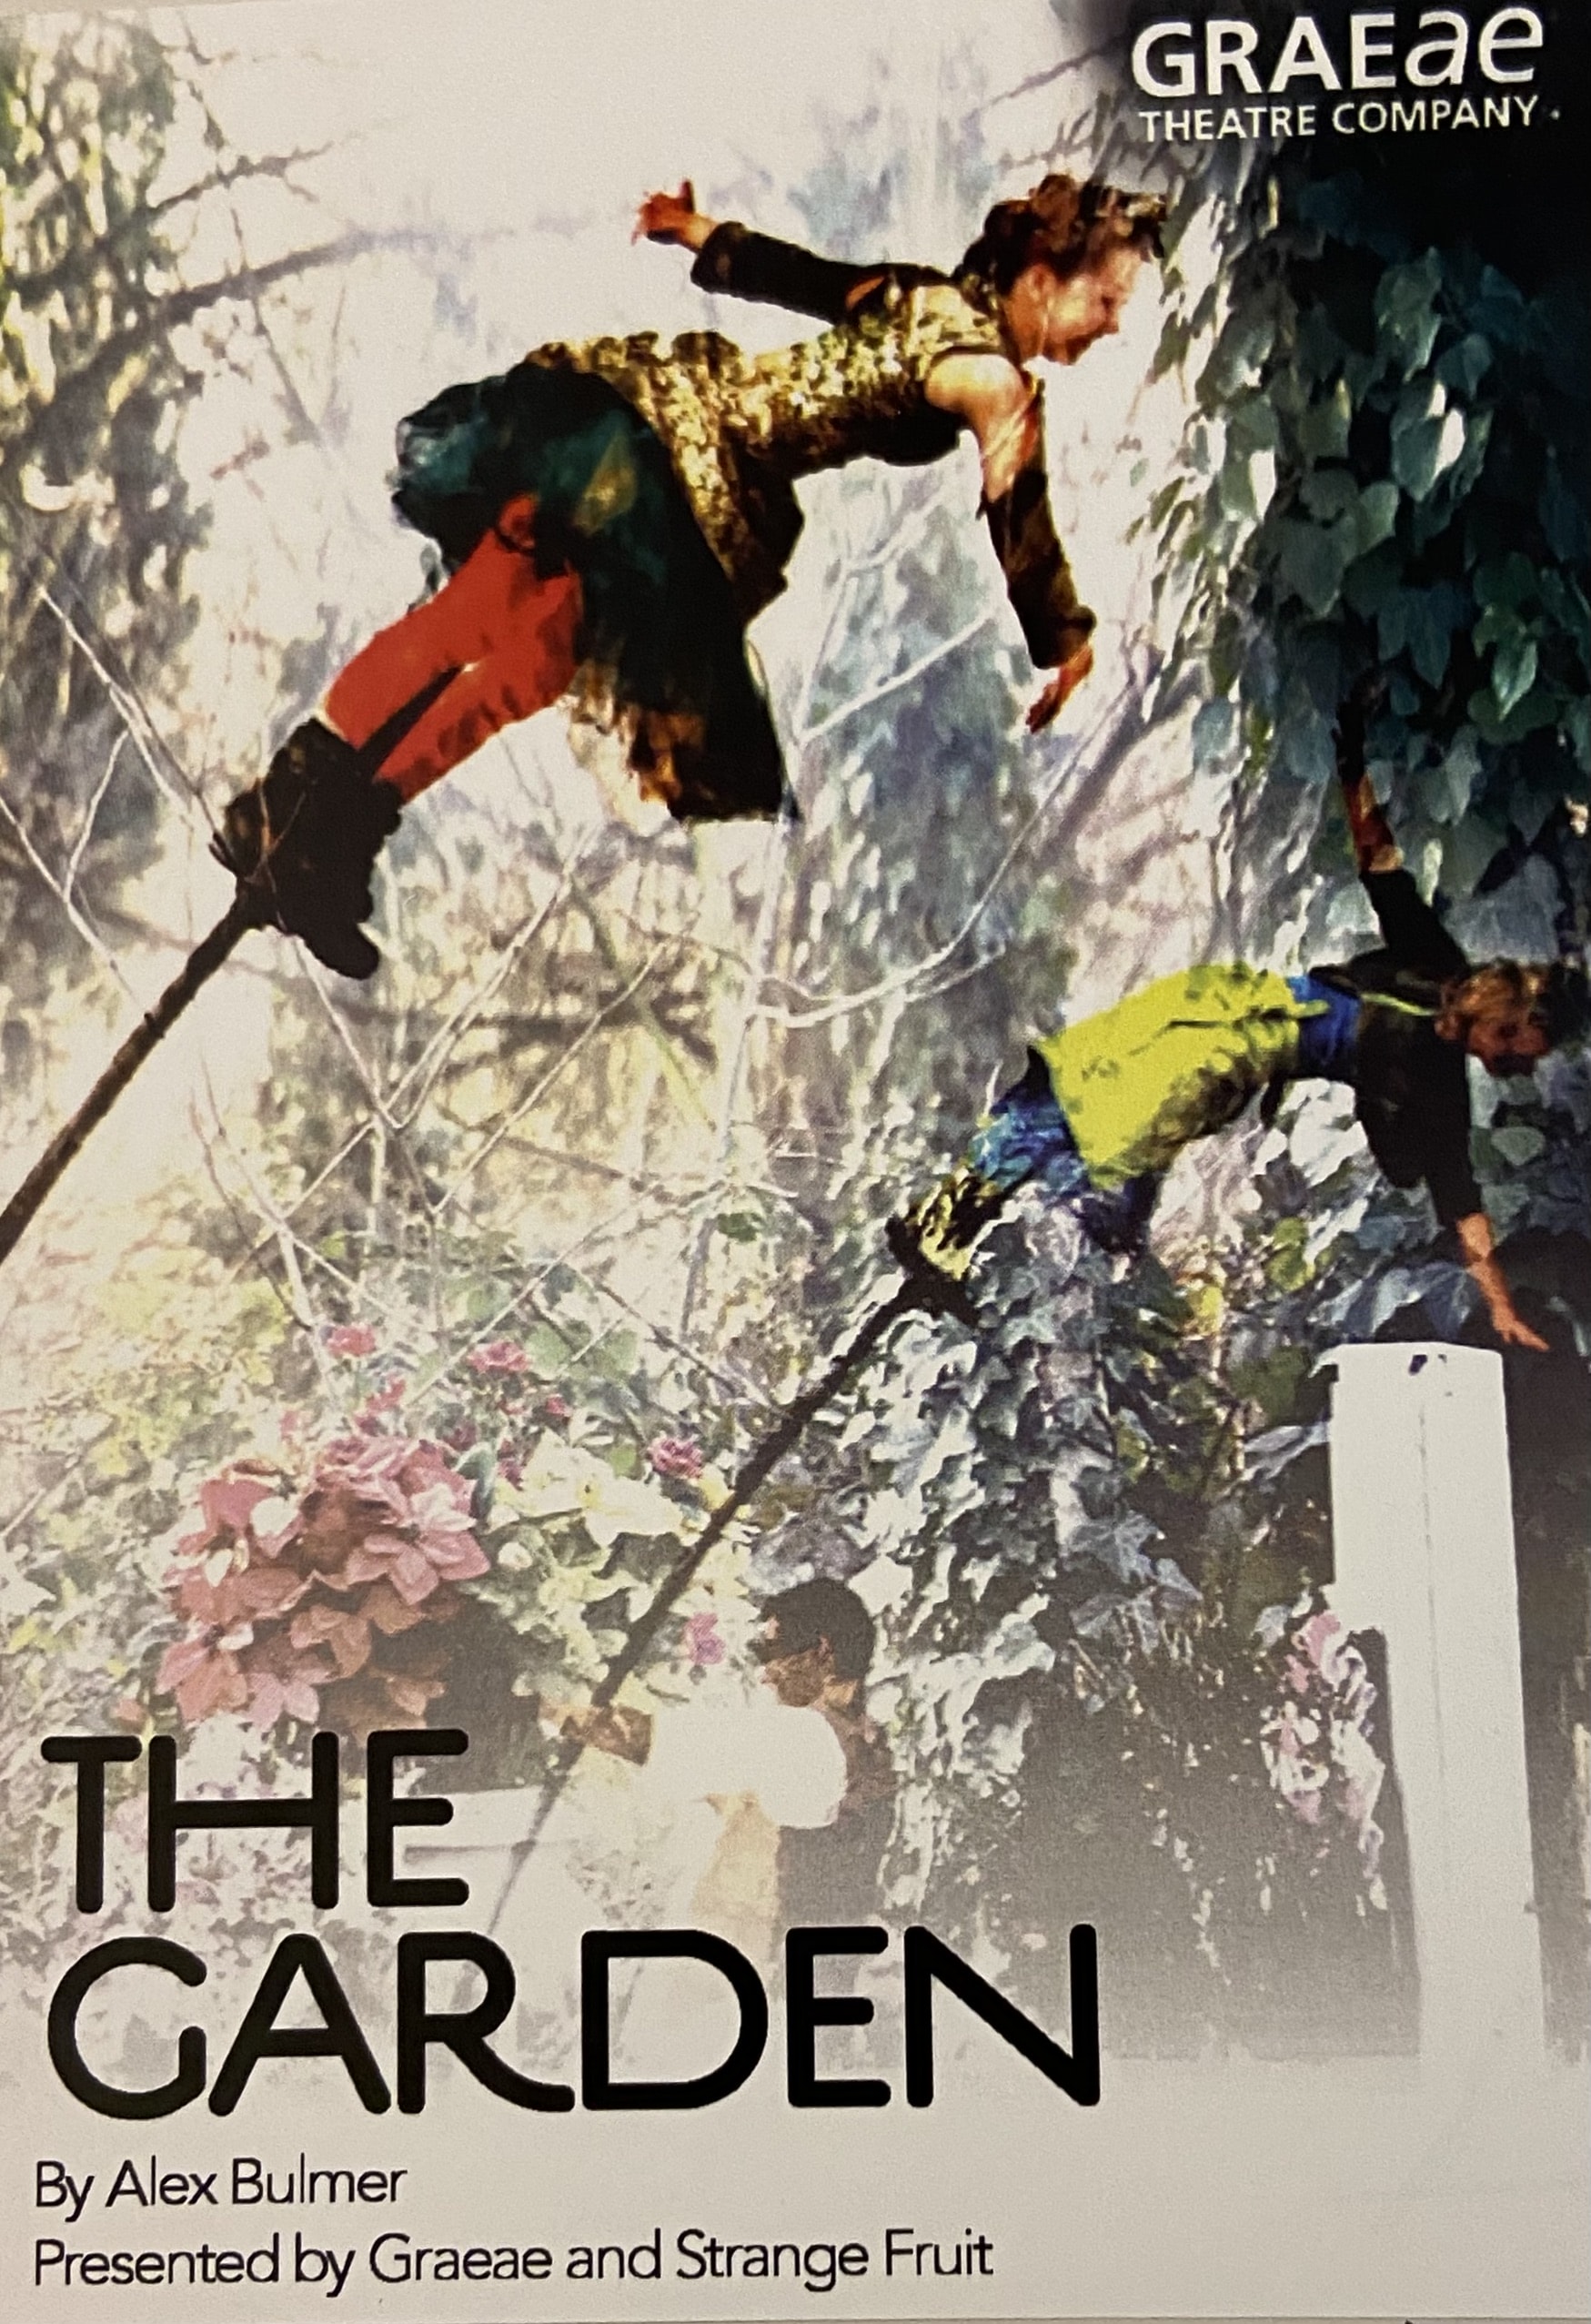 A poster for Graeae's 'The Garden' by Alex Bulmer. The poster shows two ariel performers.